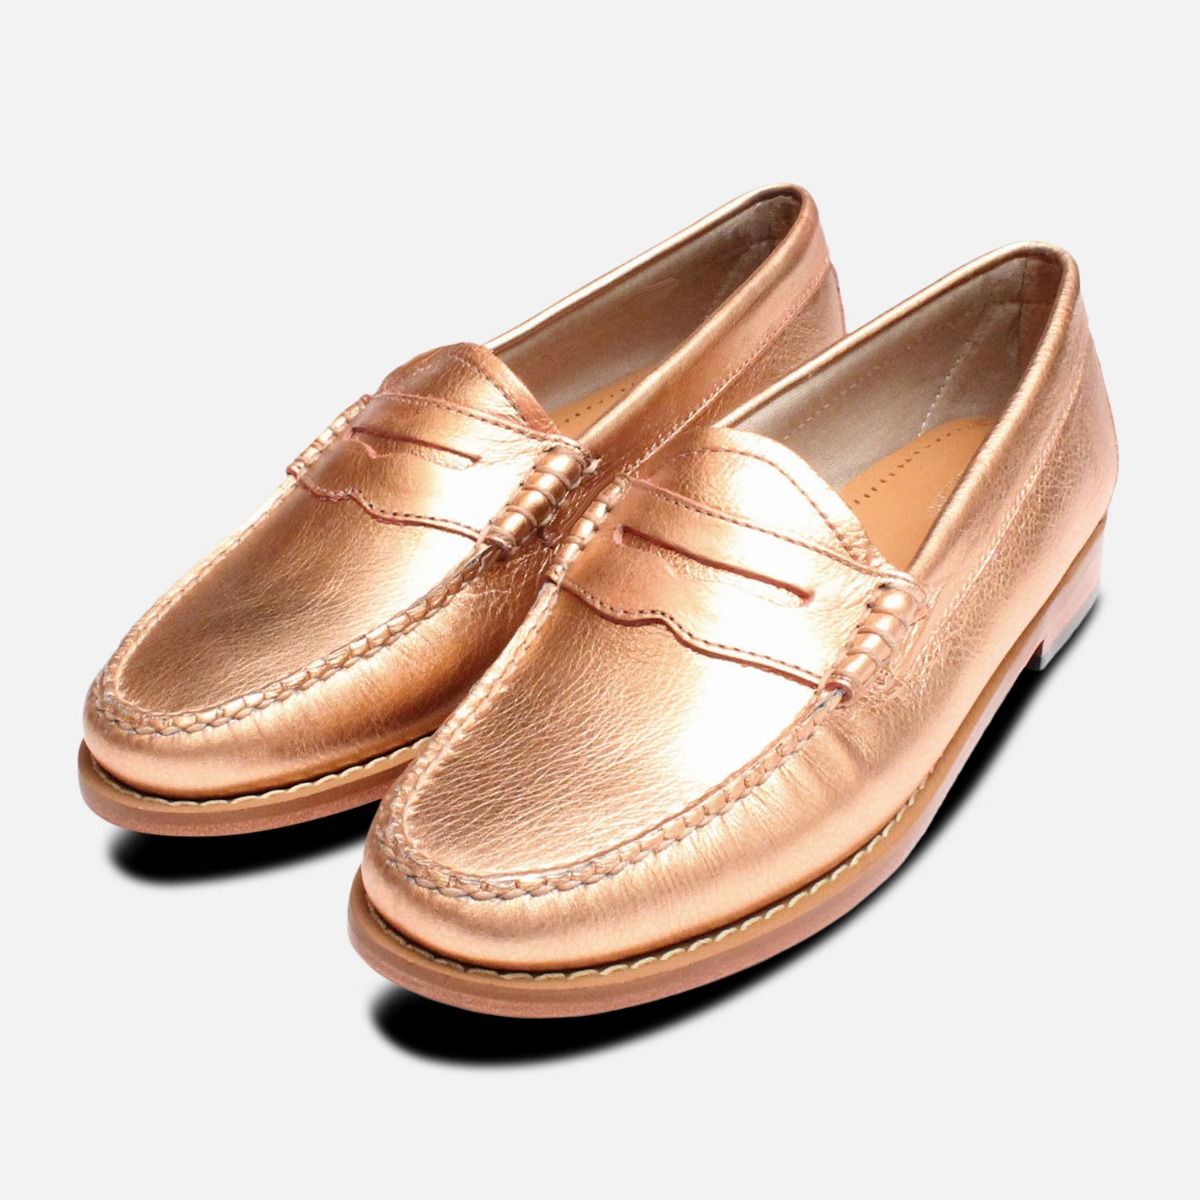 gold penny loafers